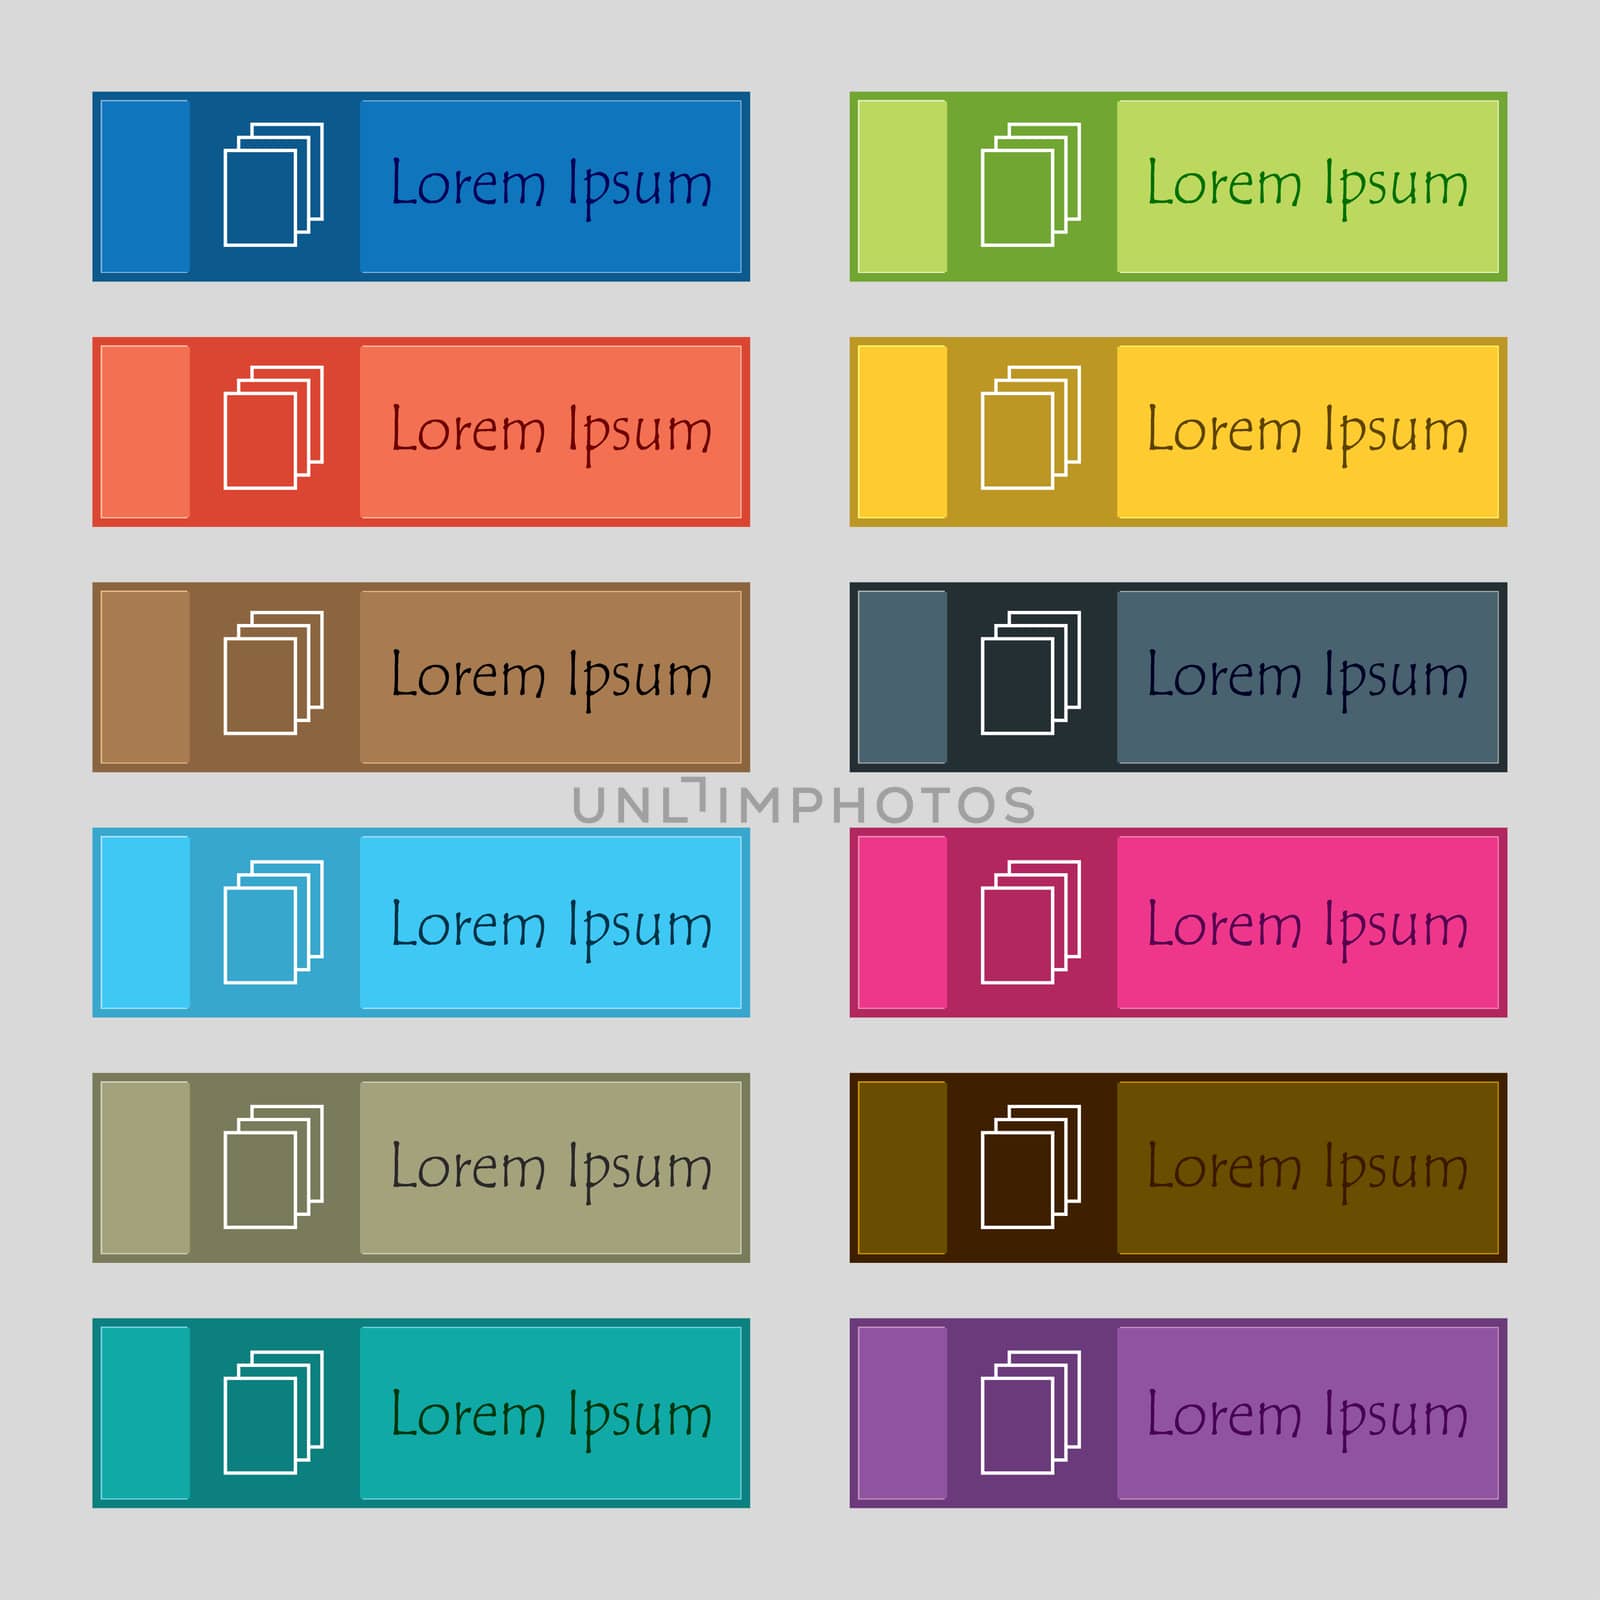 Copy file sign icon. Duplicate document symbol. Set of coloured buttons. illustration